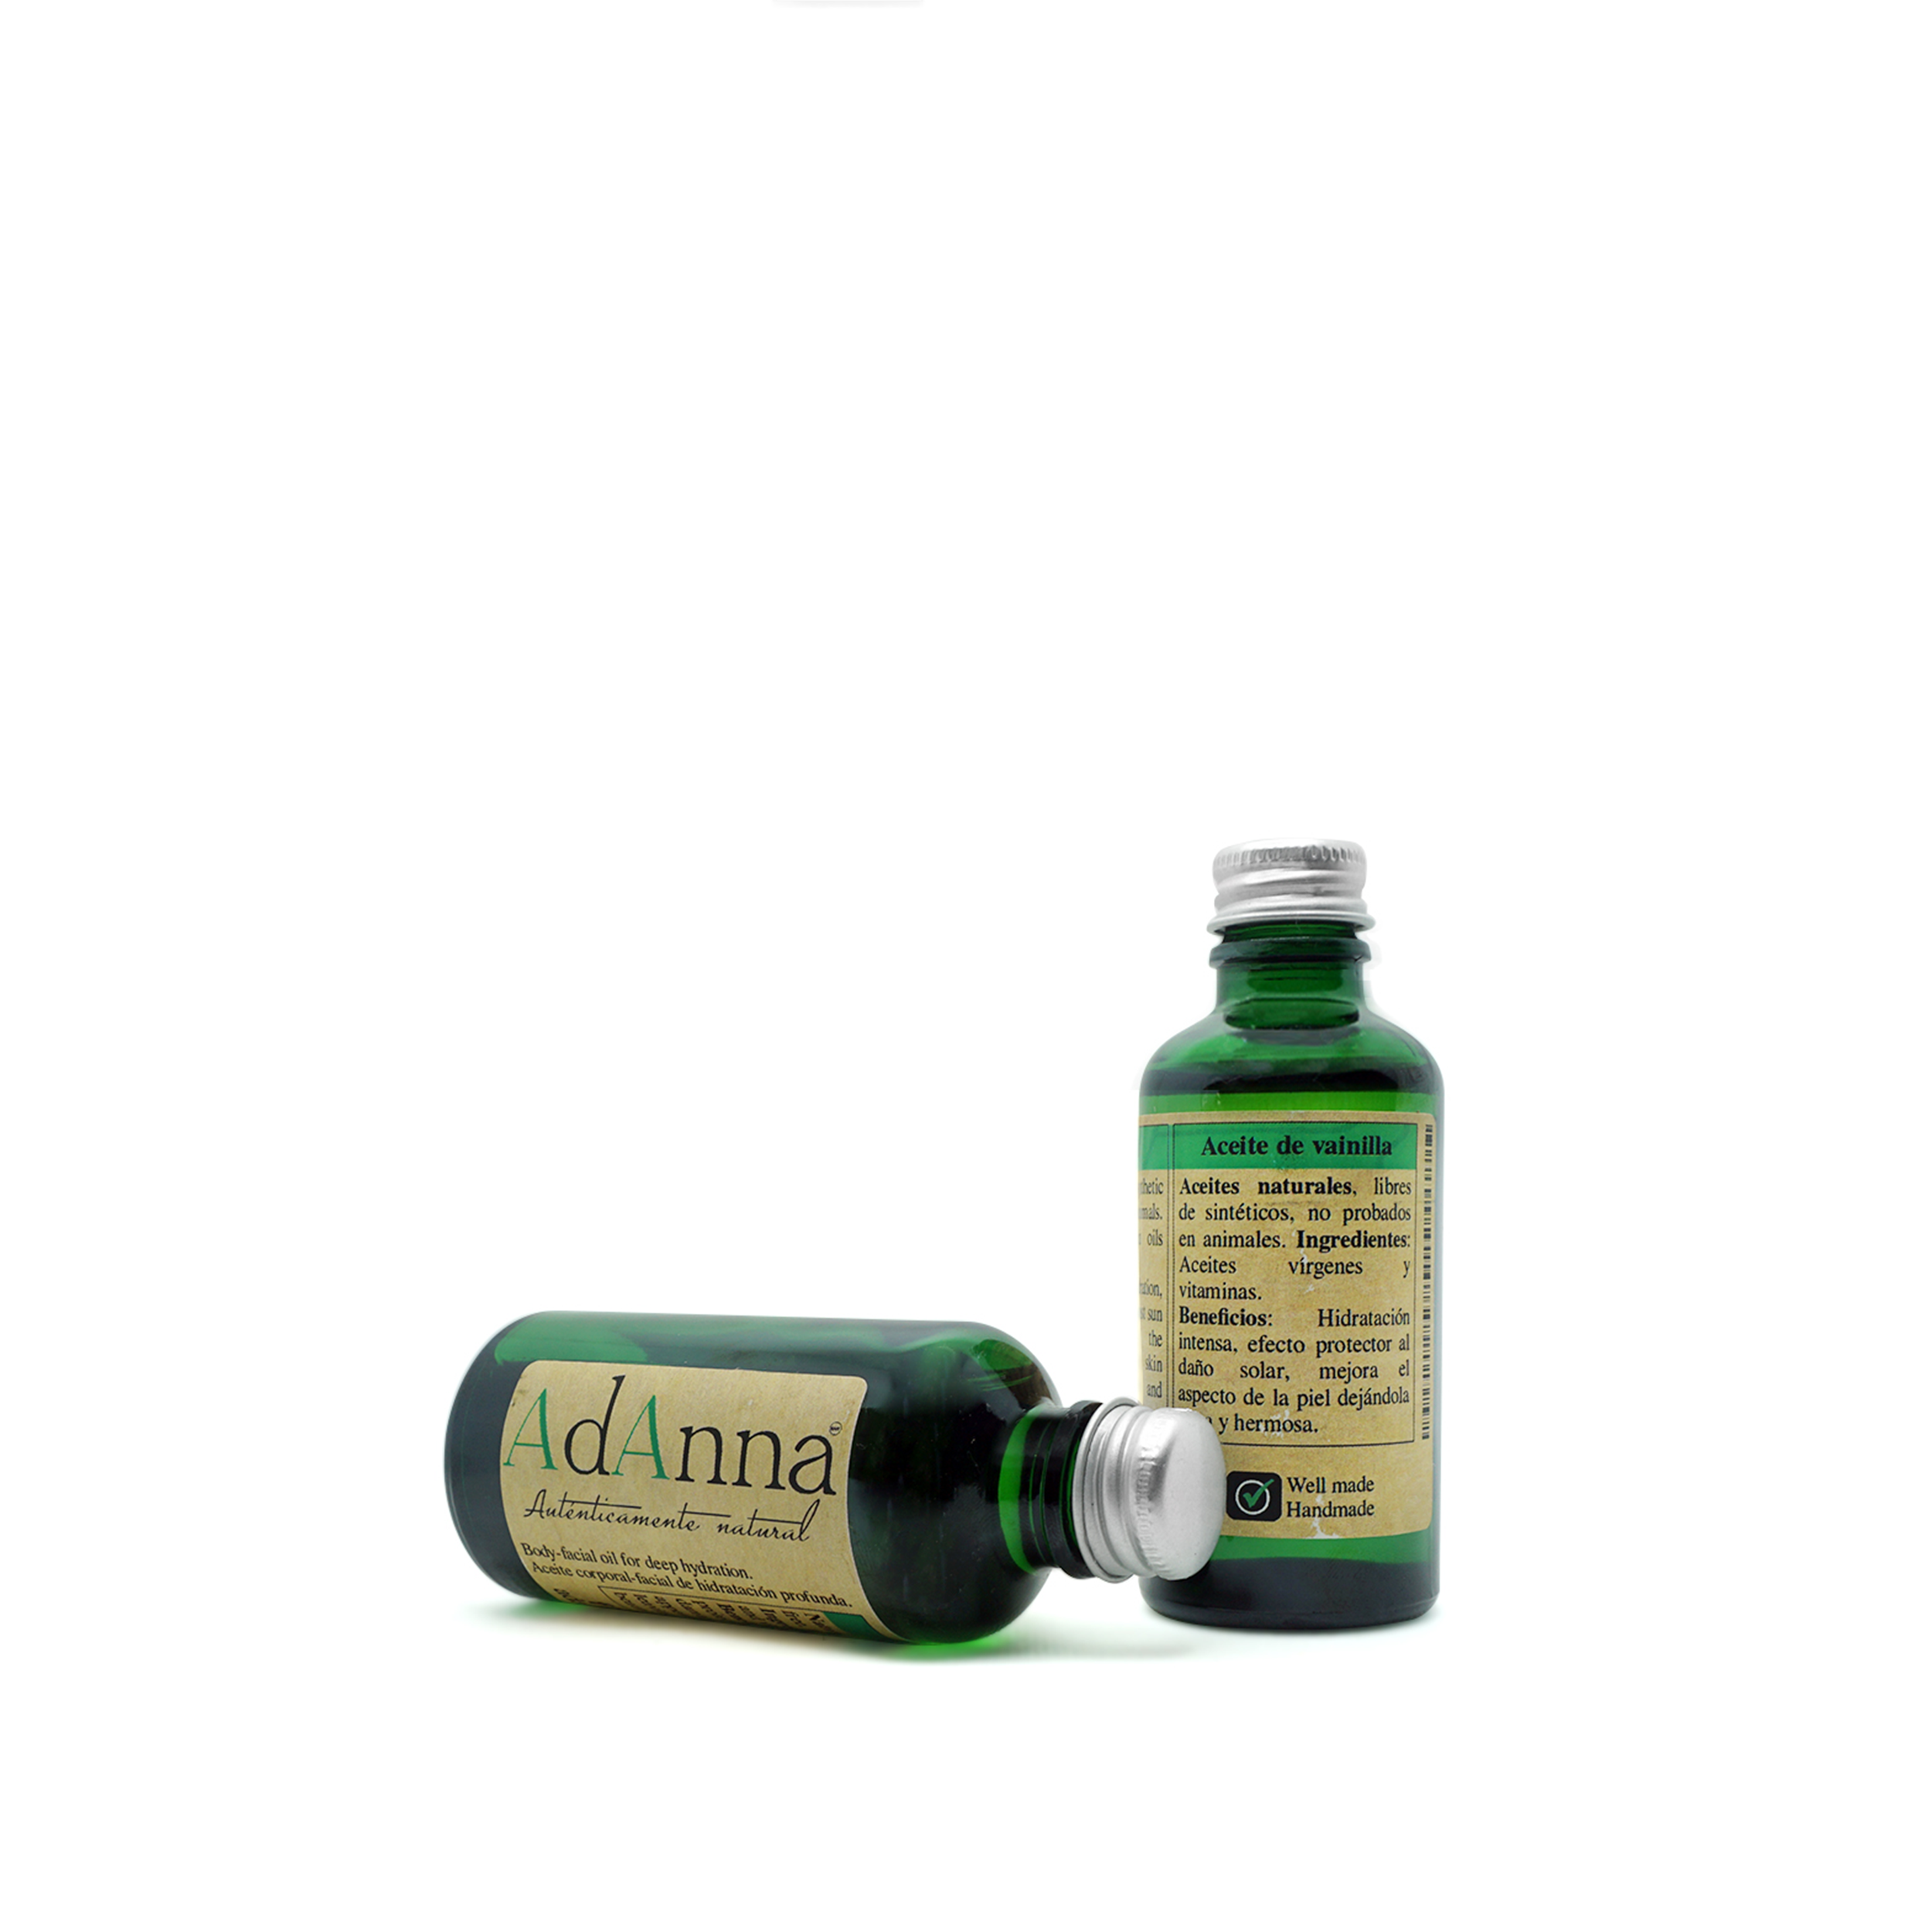 Adanna - Aceite corporal humectante